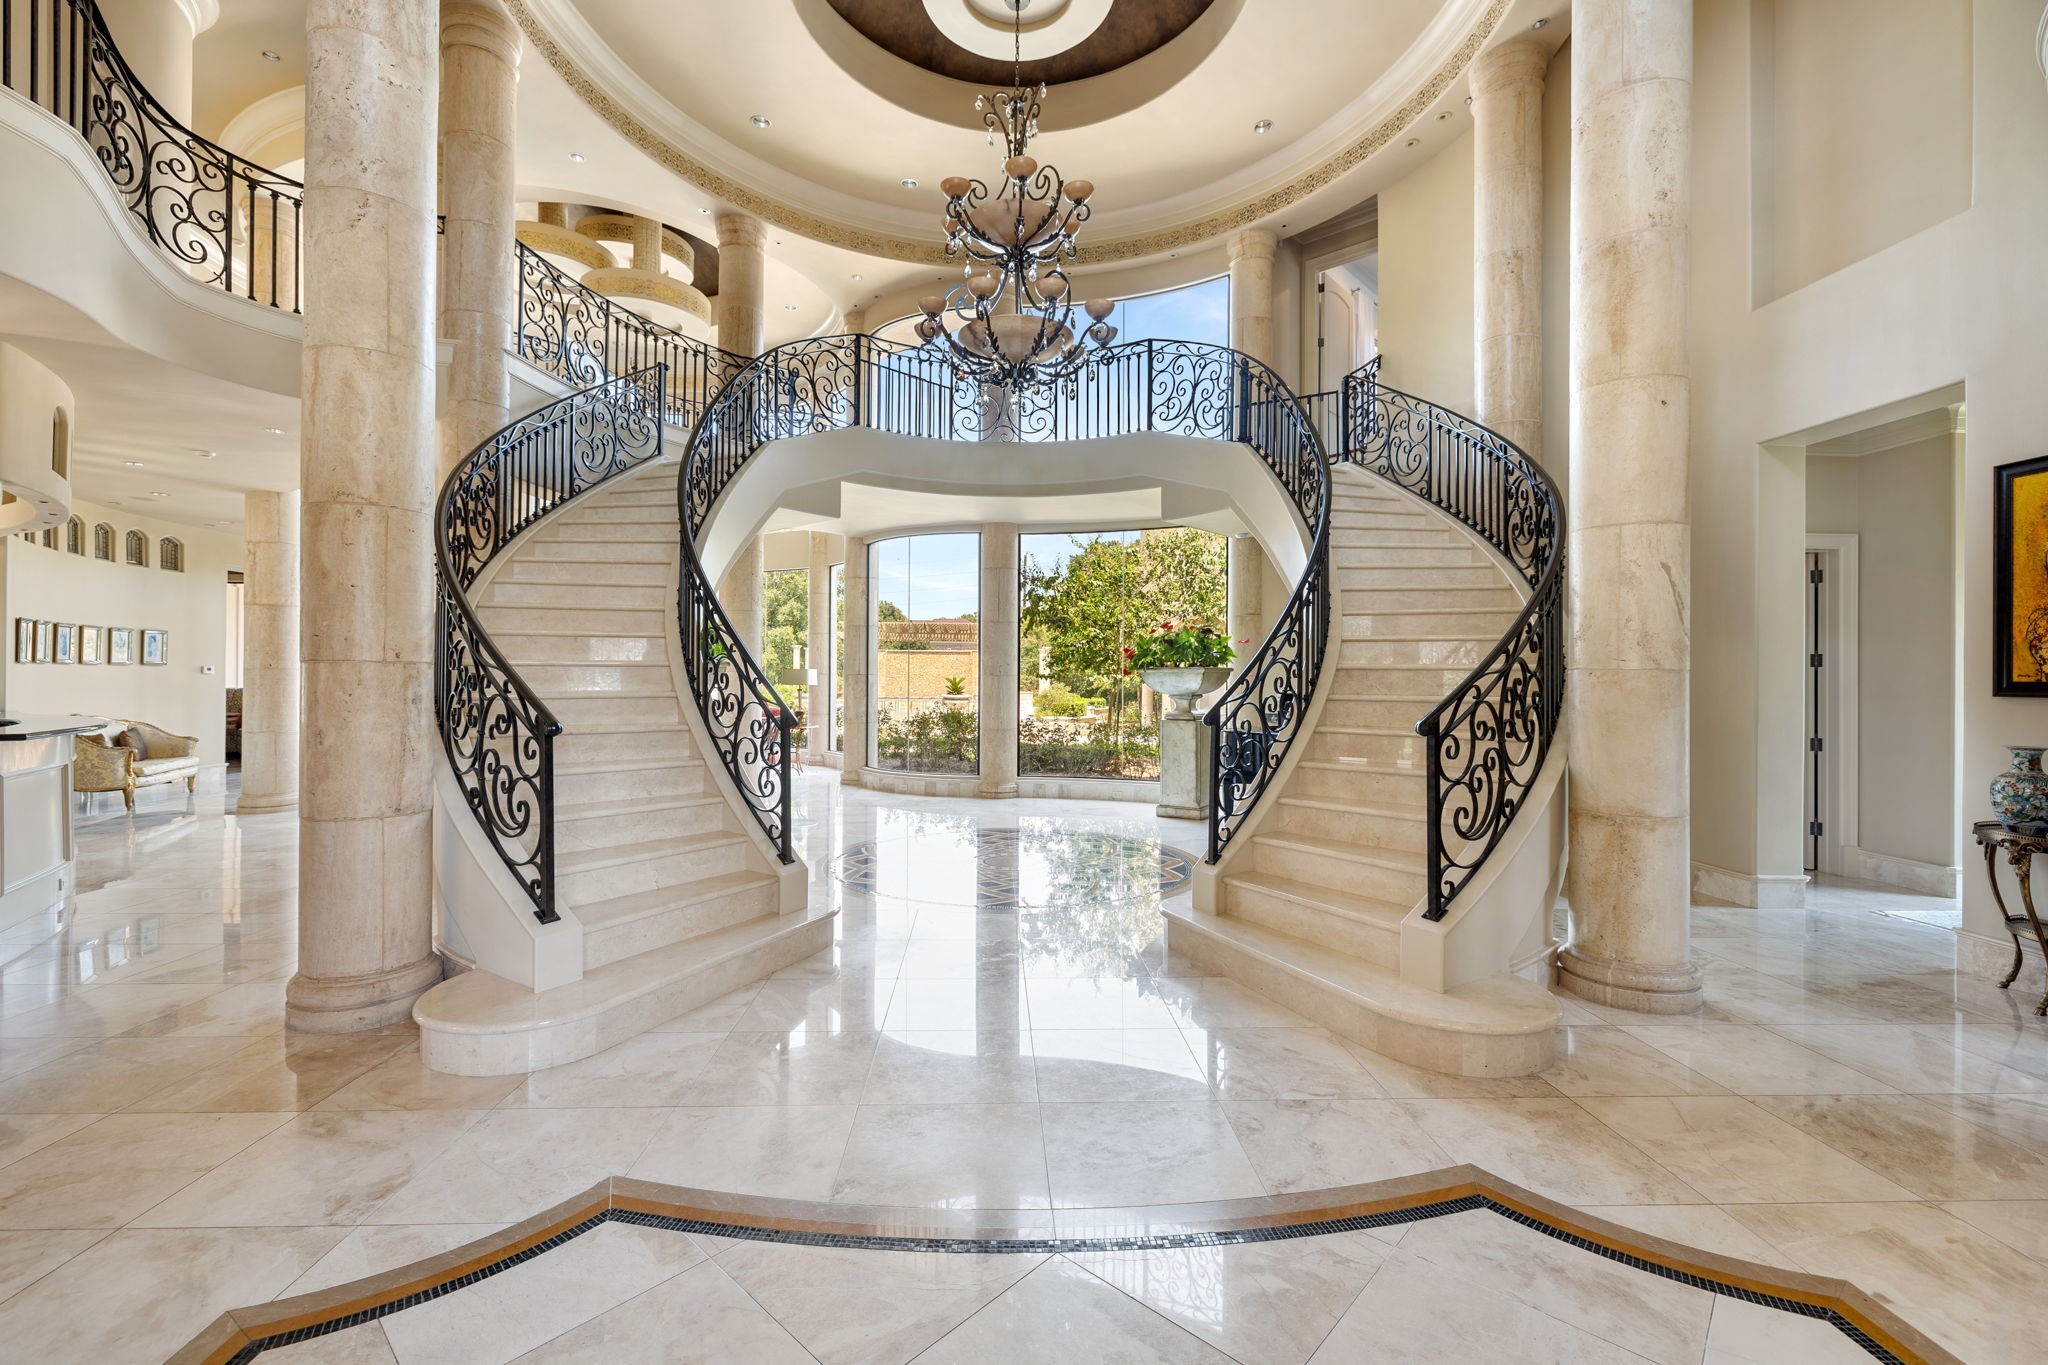 Forming the heart of the home, the Grand Foyer is palatial in scale with a captivating double marble clad helical staircase, Baroque round stone columns, and Marble floors with decorative inlays. The light within is boundless.